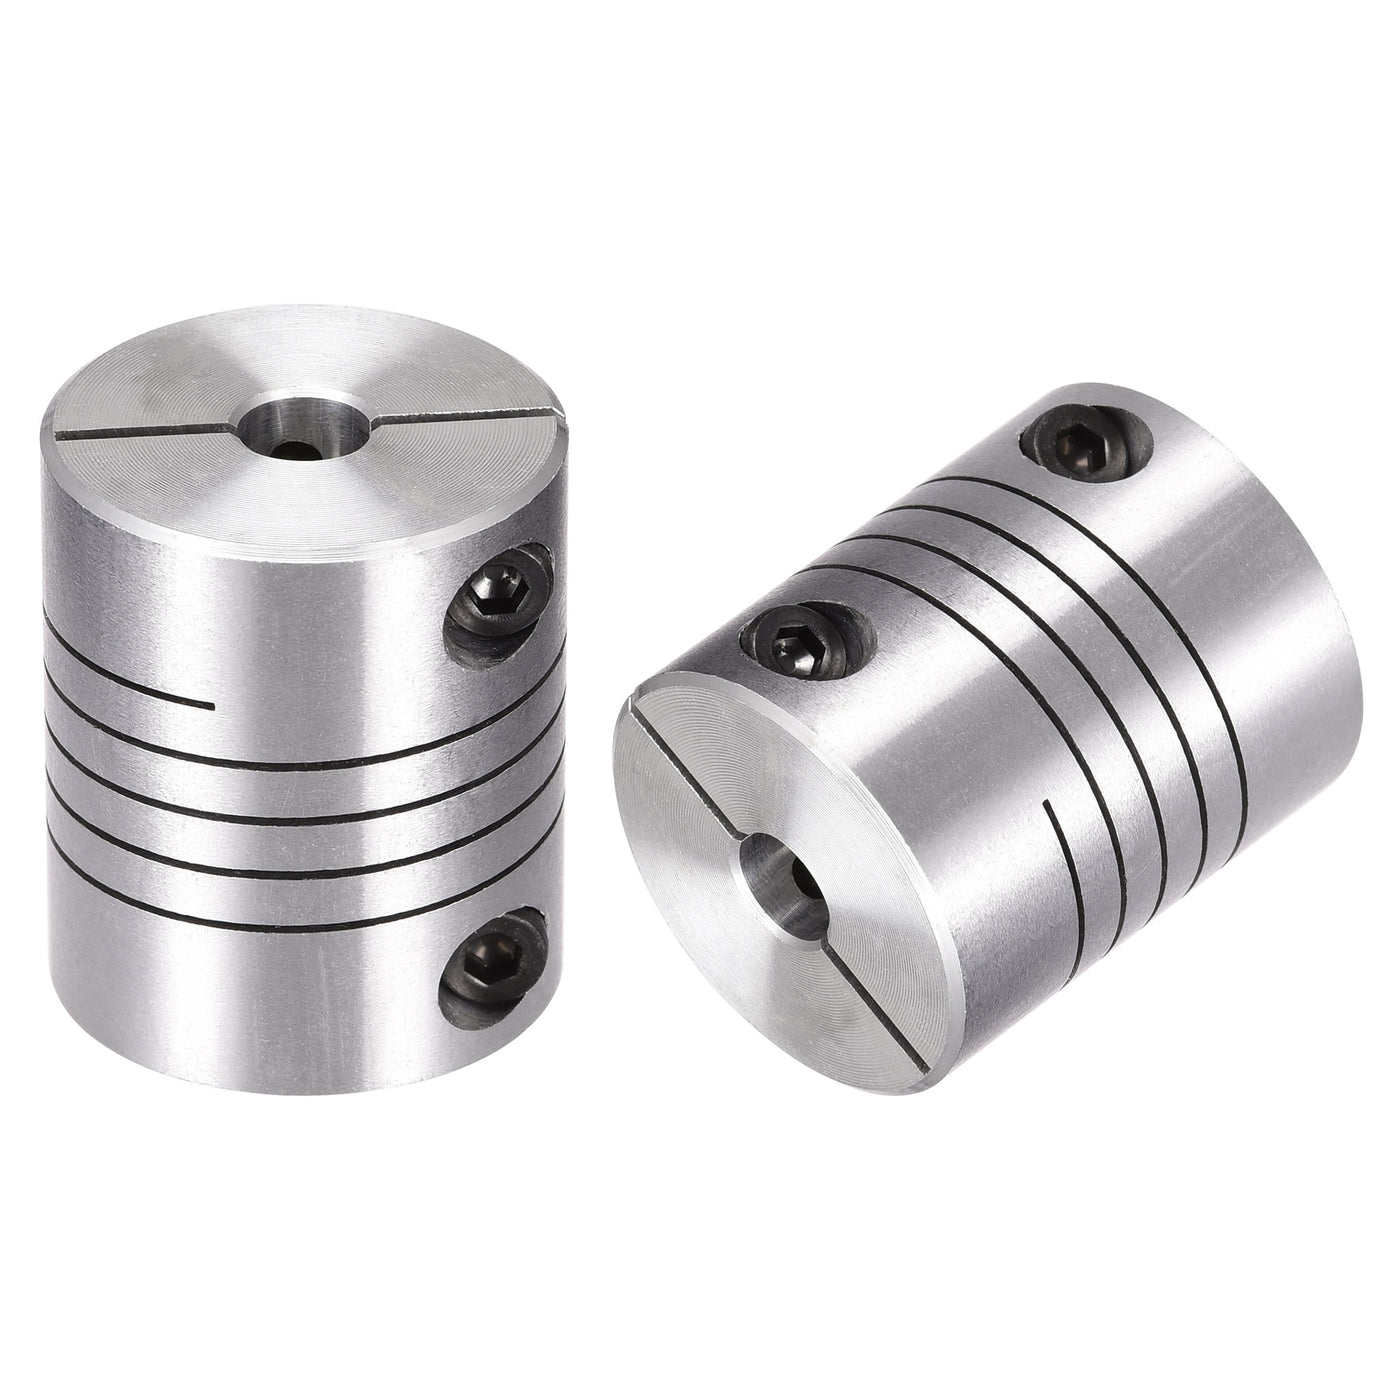 uxcell Uxcell 2PCS Motor Shaft 4mm to 6.35mm Helical Beam Coupler Coupling 20mm Dia 25mm Long